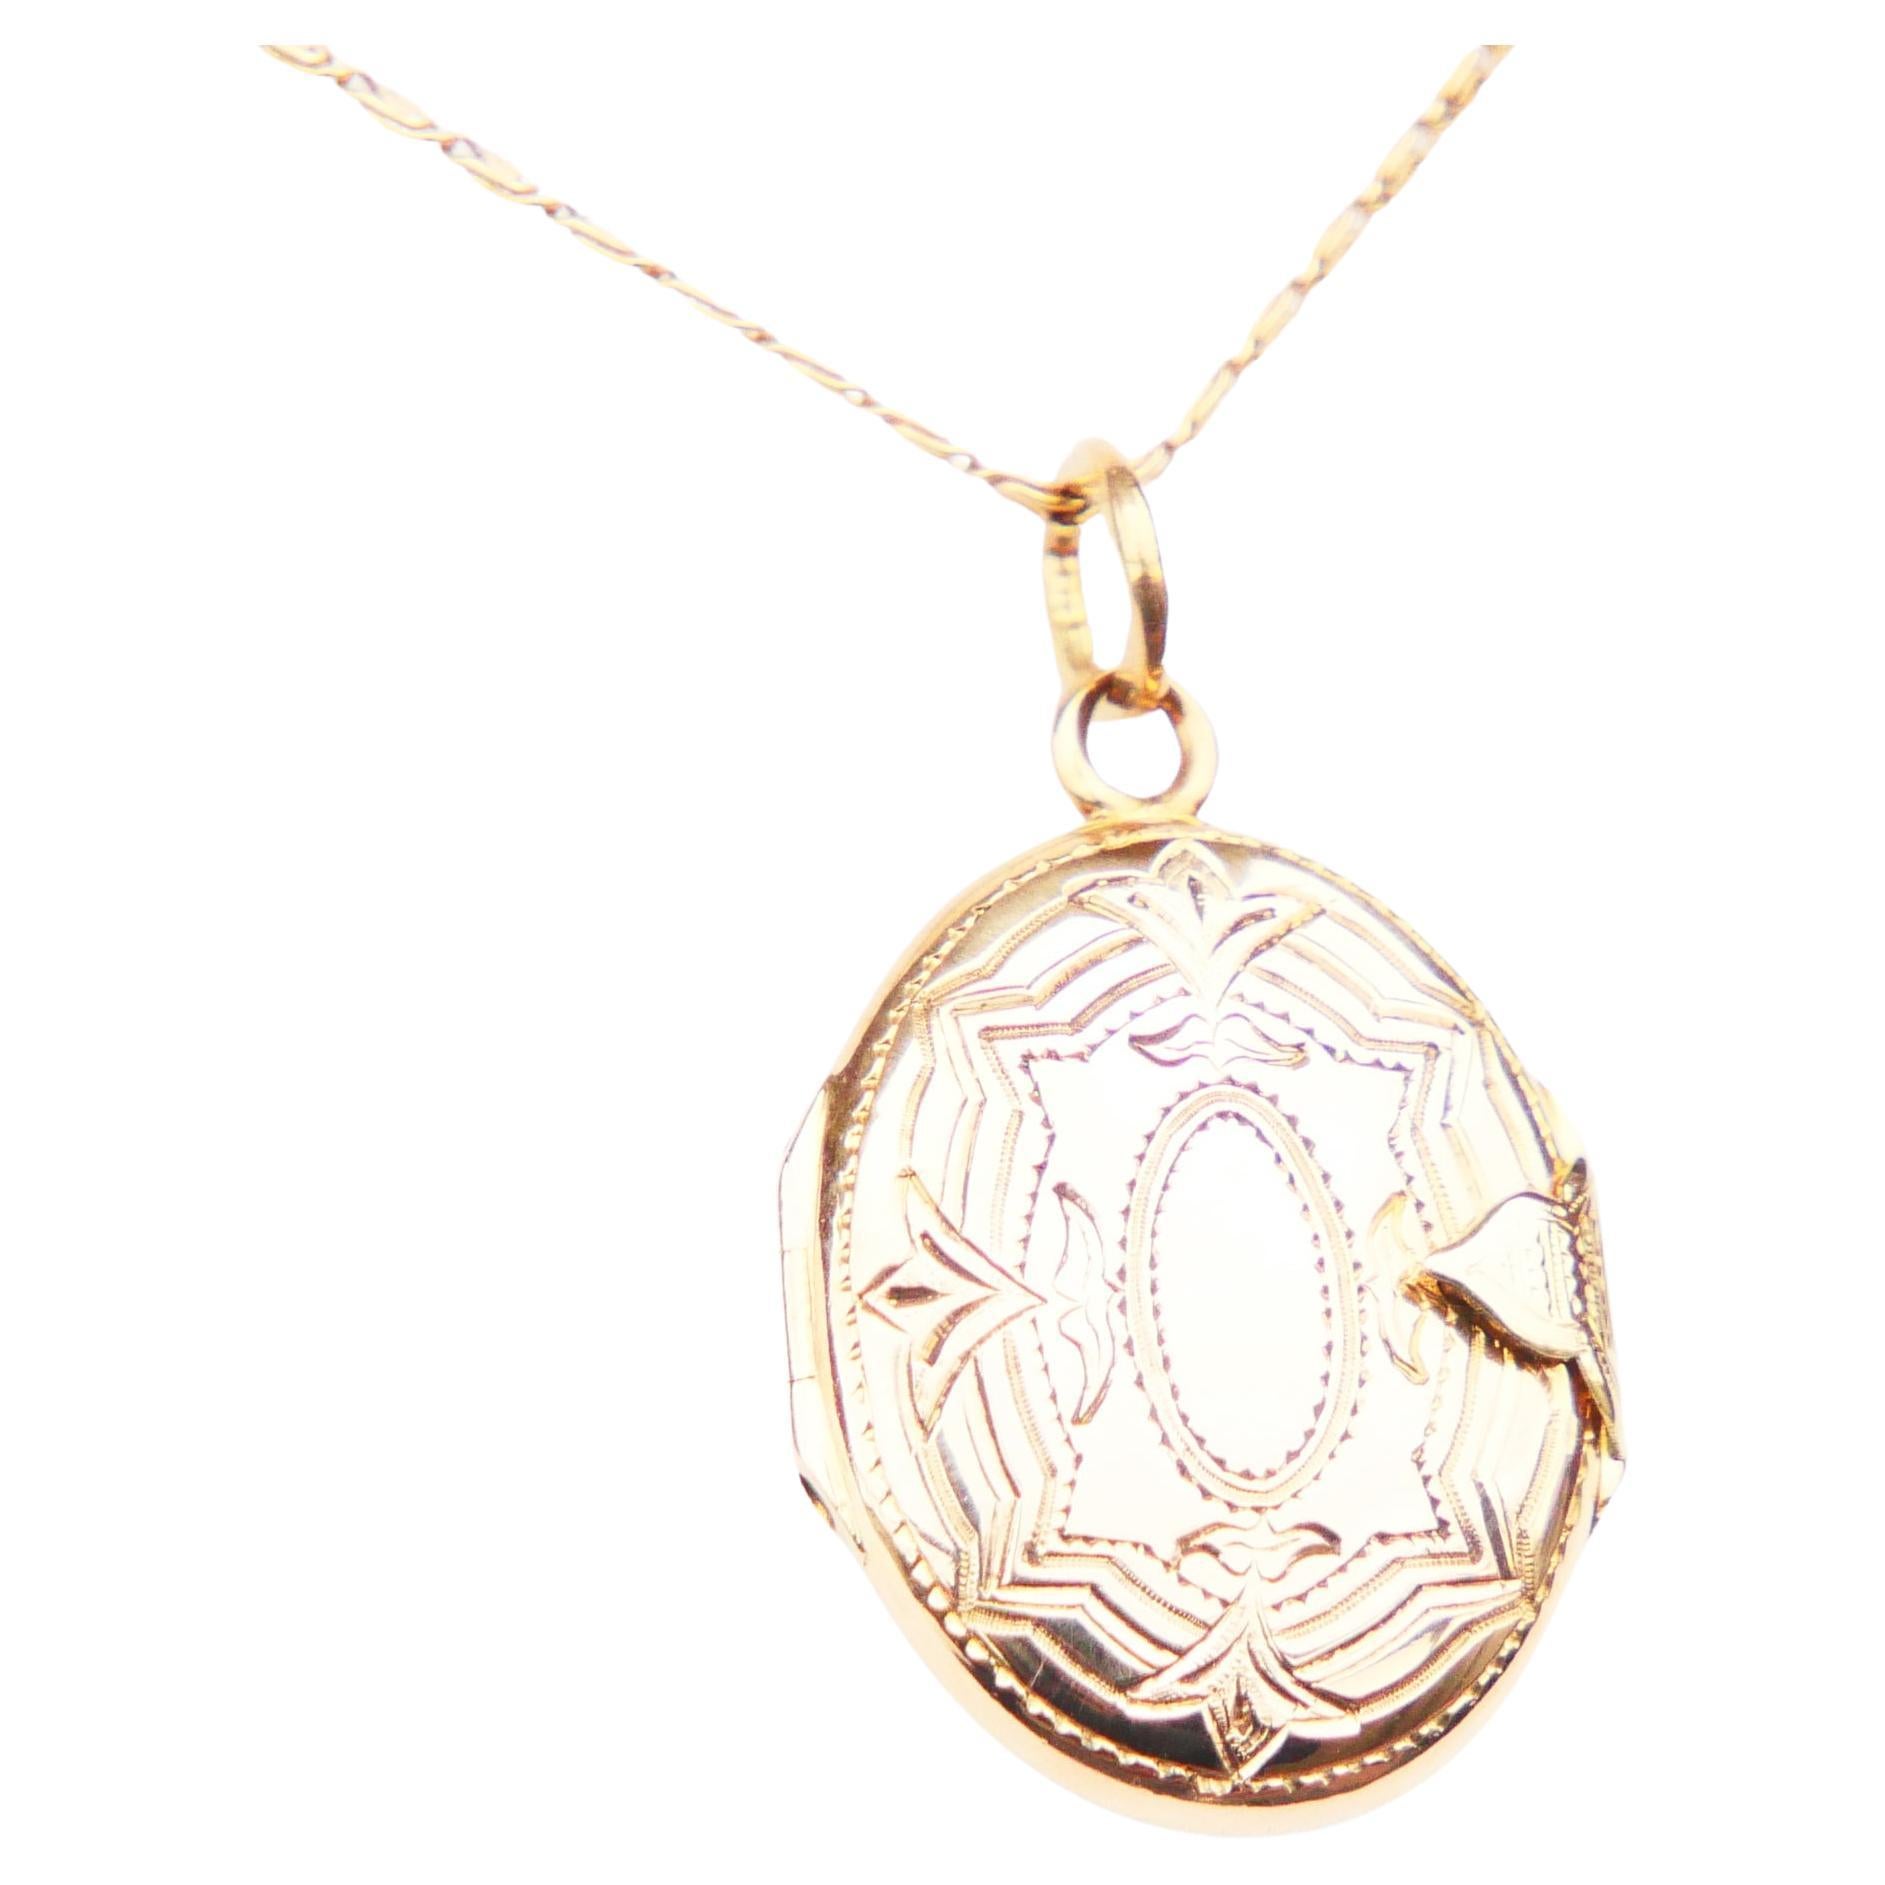 Antique Nordic Pendant Picture Locket oval solid 18K Yellow Gold/ 4.35gr